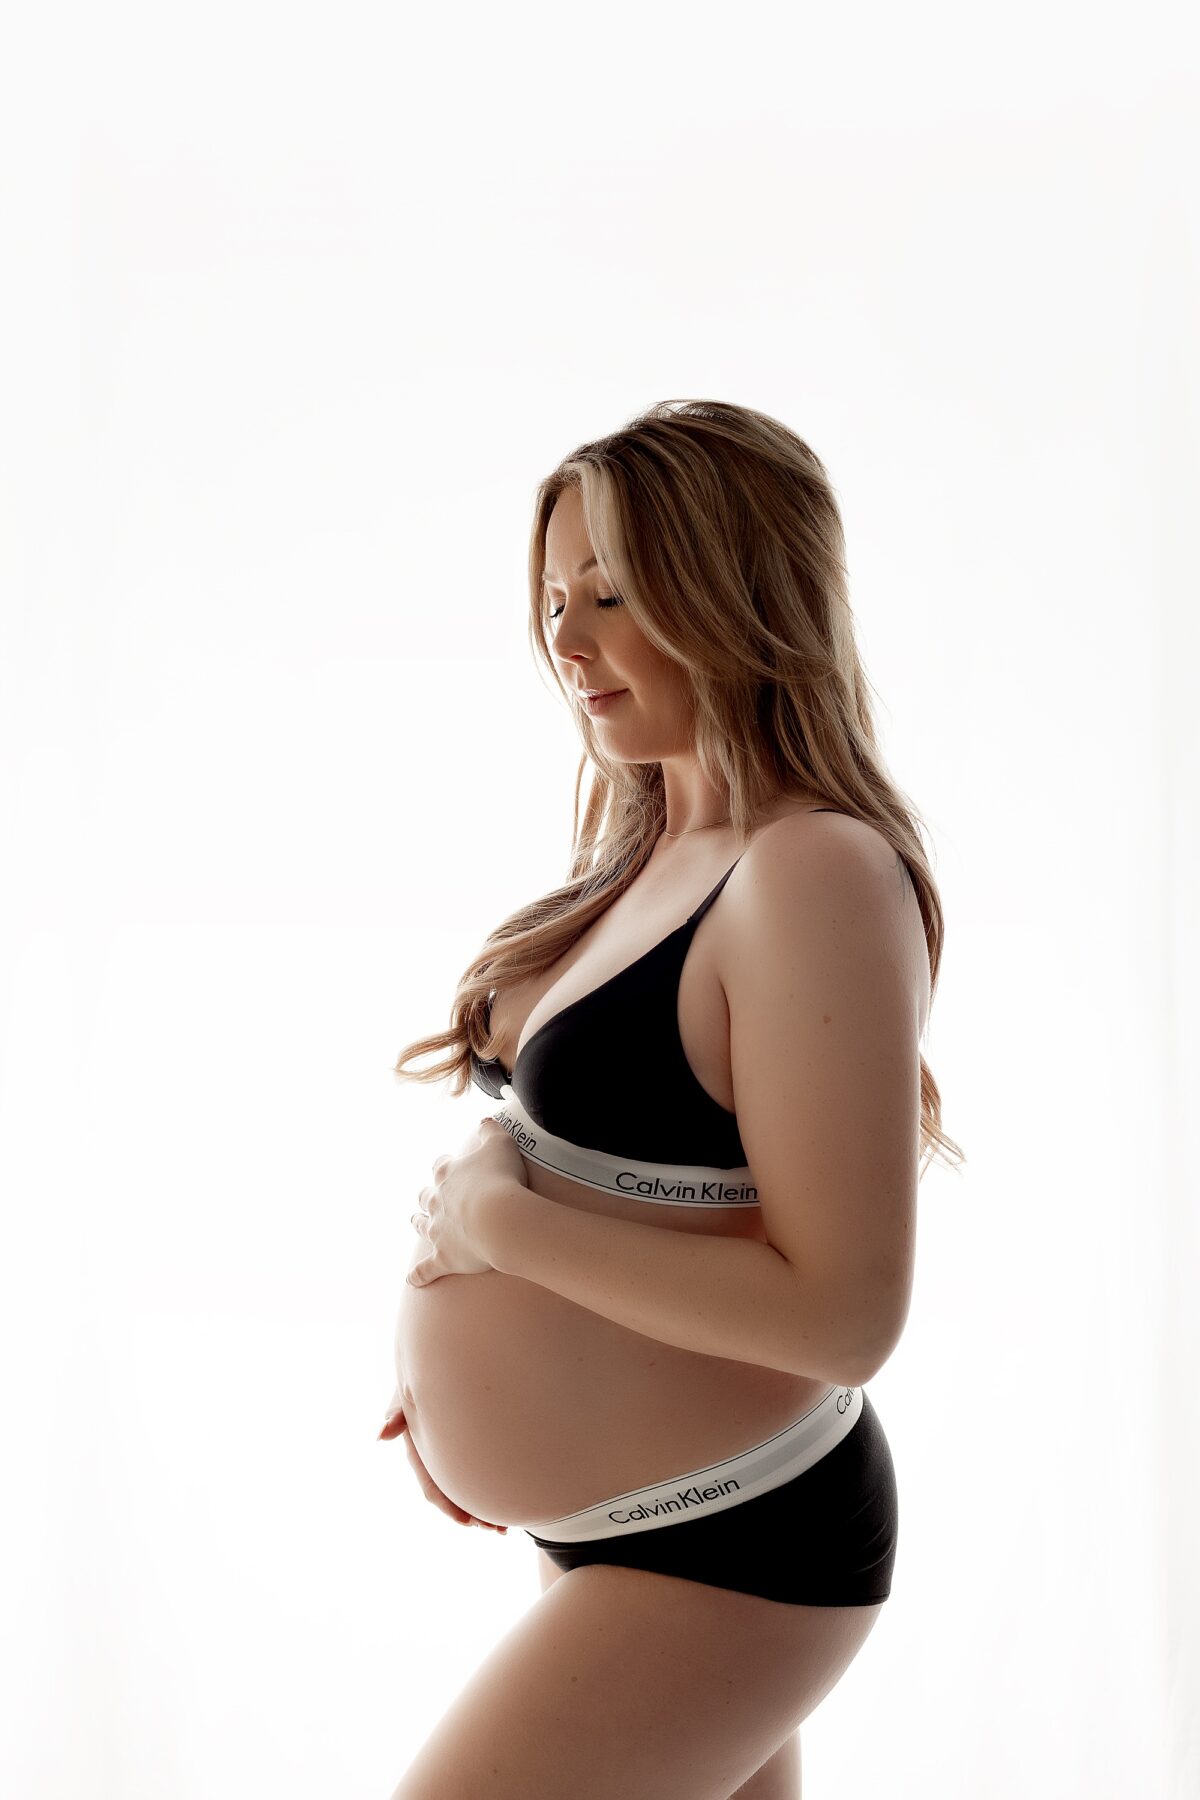 calvin klein maternity, edmonton maternity photographer, edmonton newborn photographer, edmonton maternity photographers, edmonton newborn photographers, high fashion, maternity gown, casual studio maternity, fabric tossing, backlit